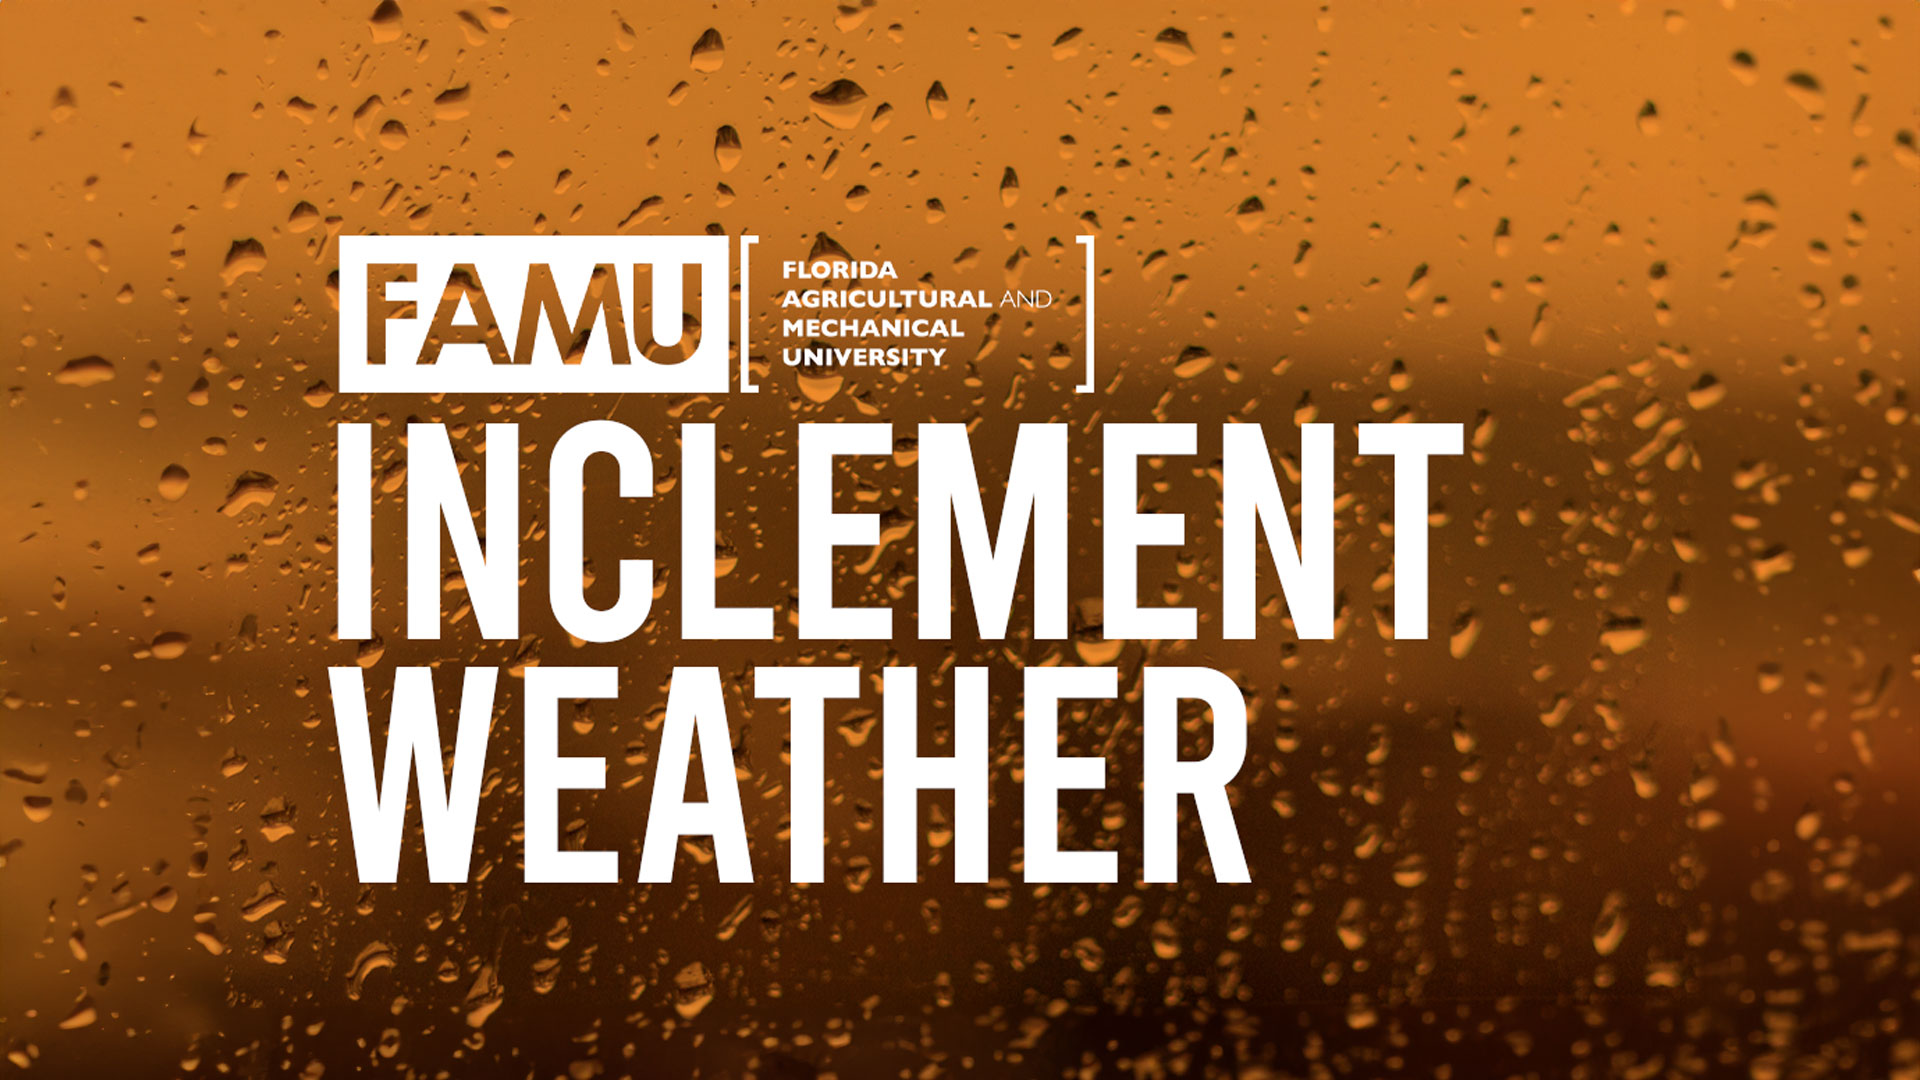 FAMU To Resume Normal Operations Wednesday Following Winter Storm